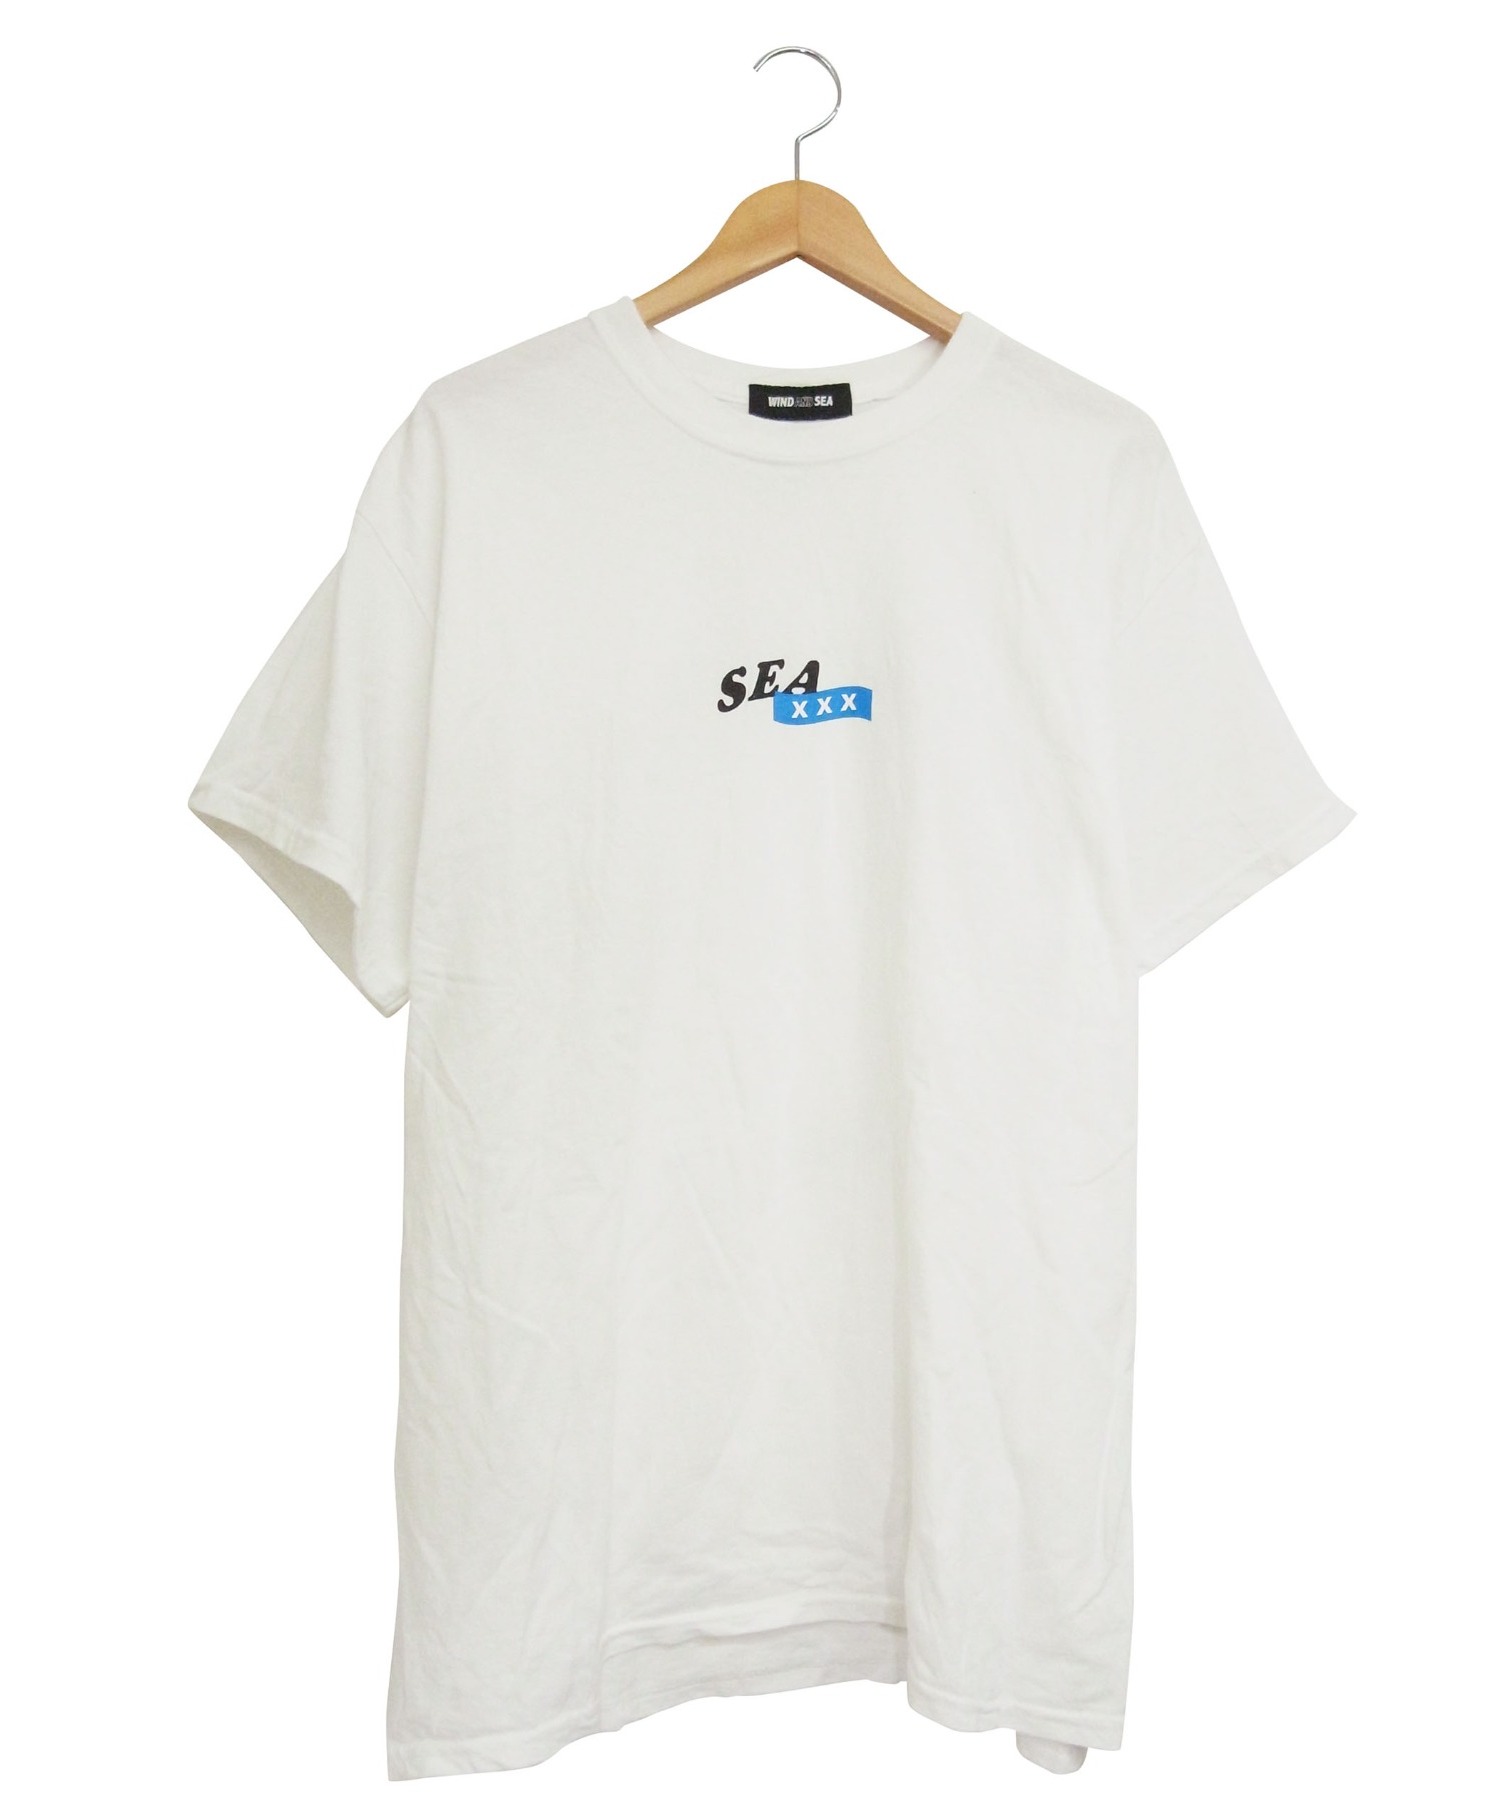 wind and sea god selection xxx tシャツご検討下さい - Tシャツ